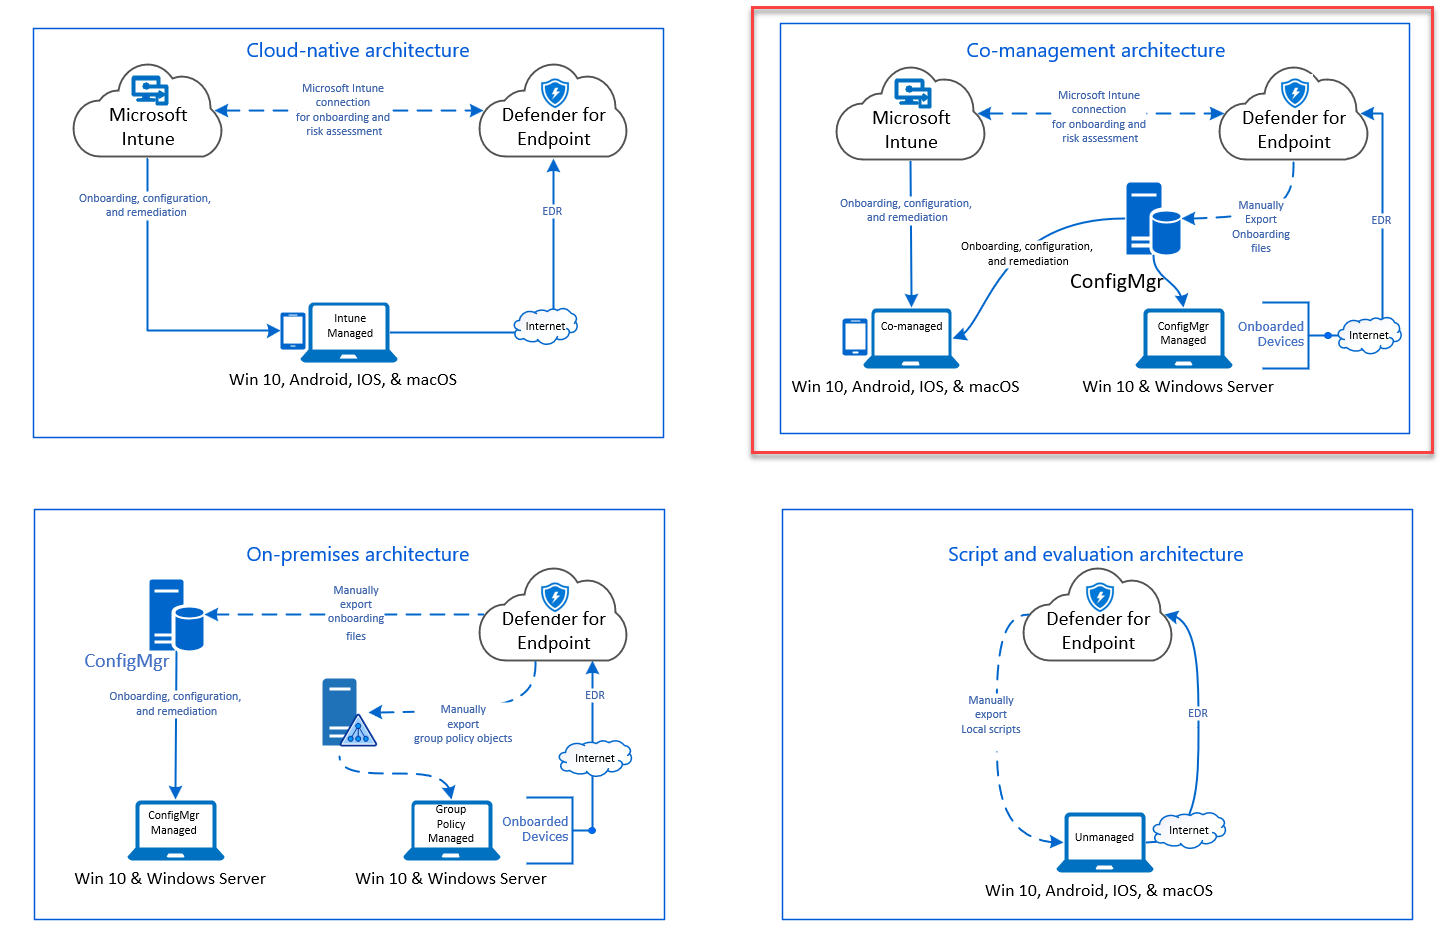 Image of cloud-native architecture.